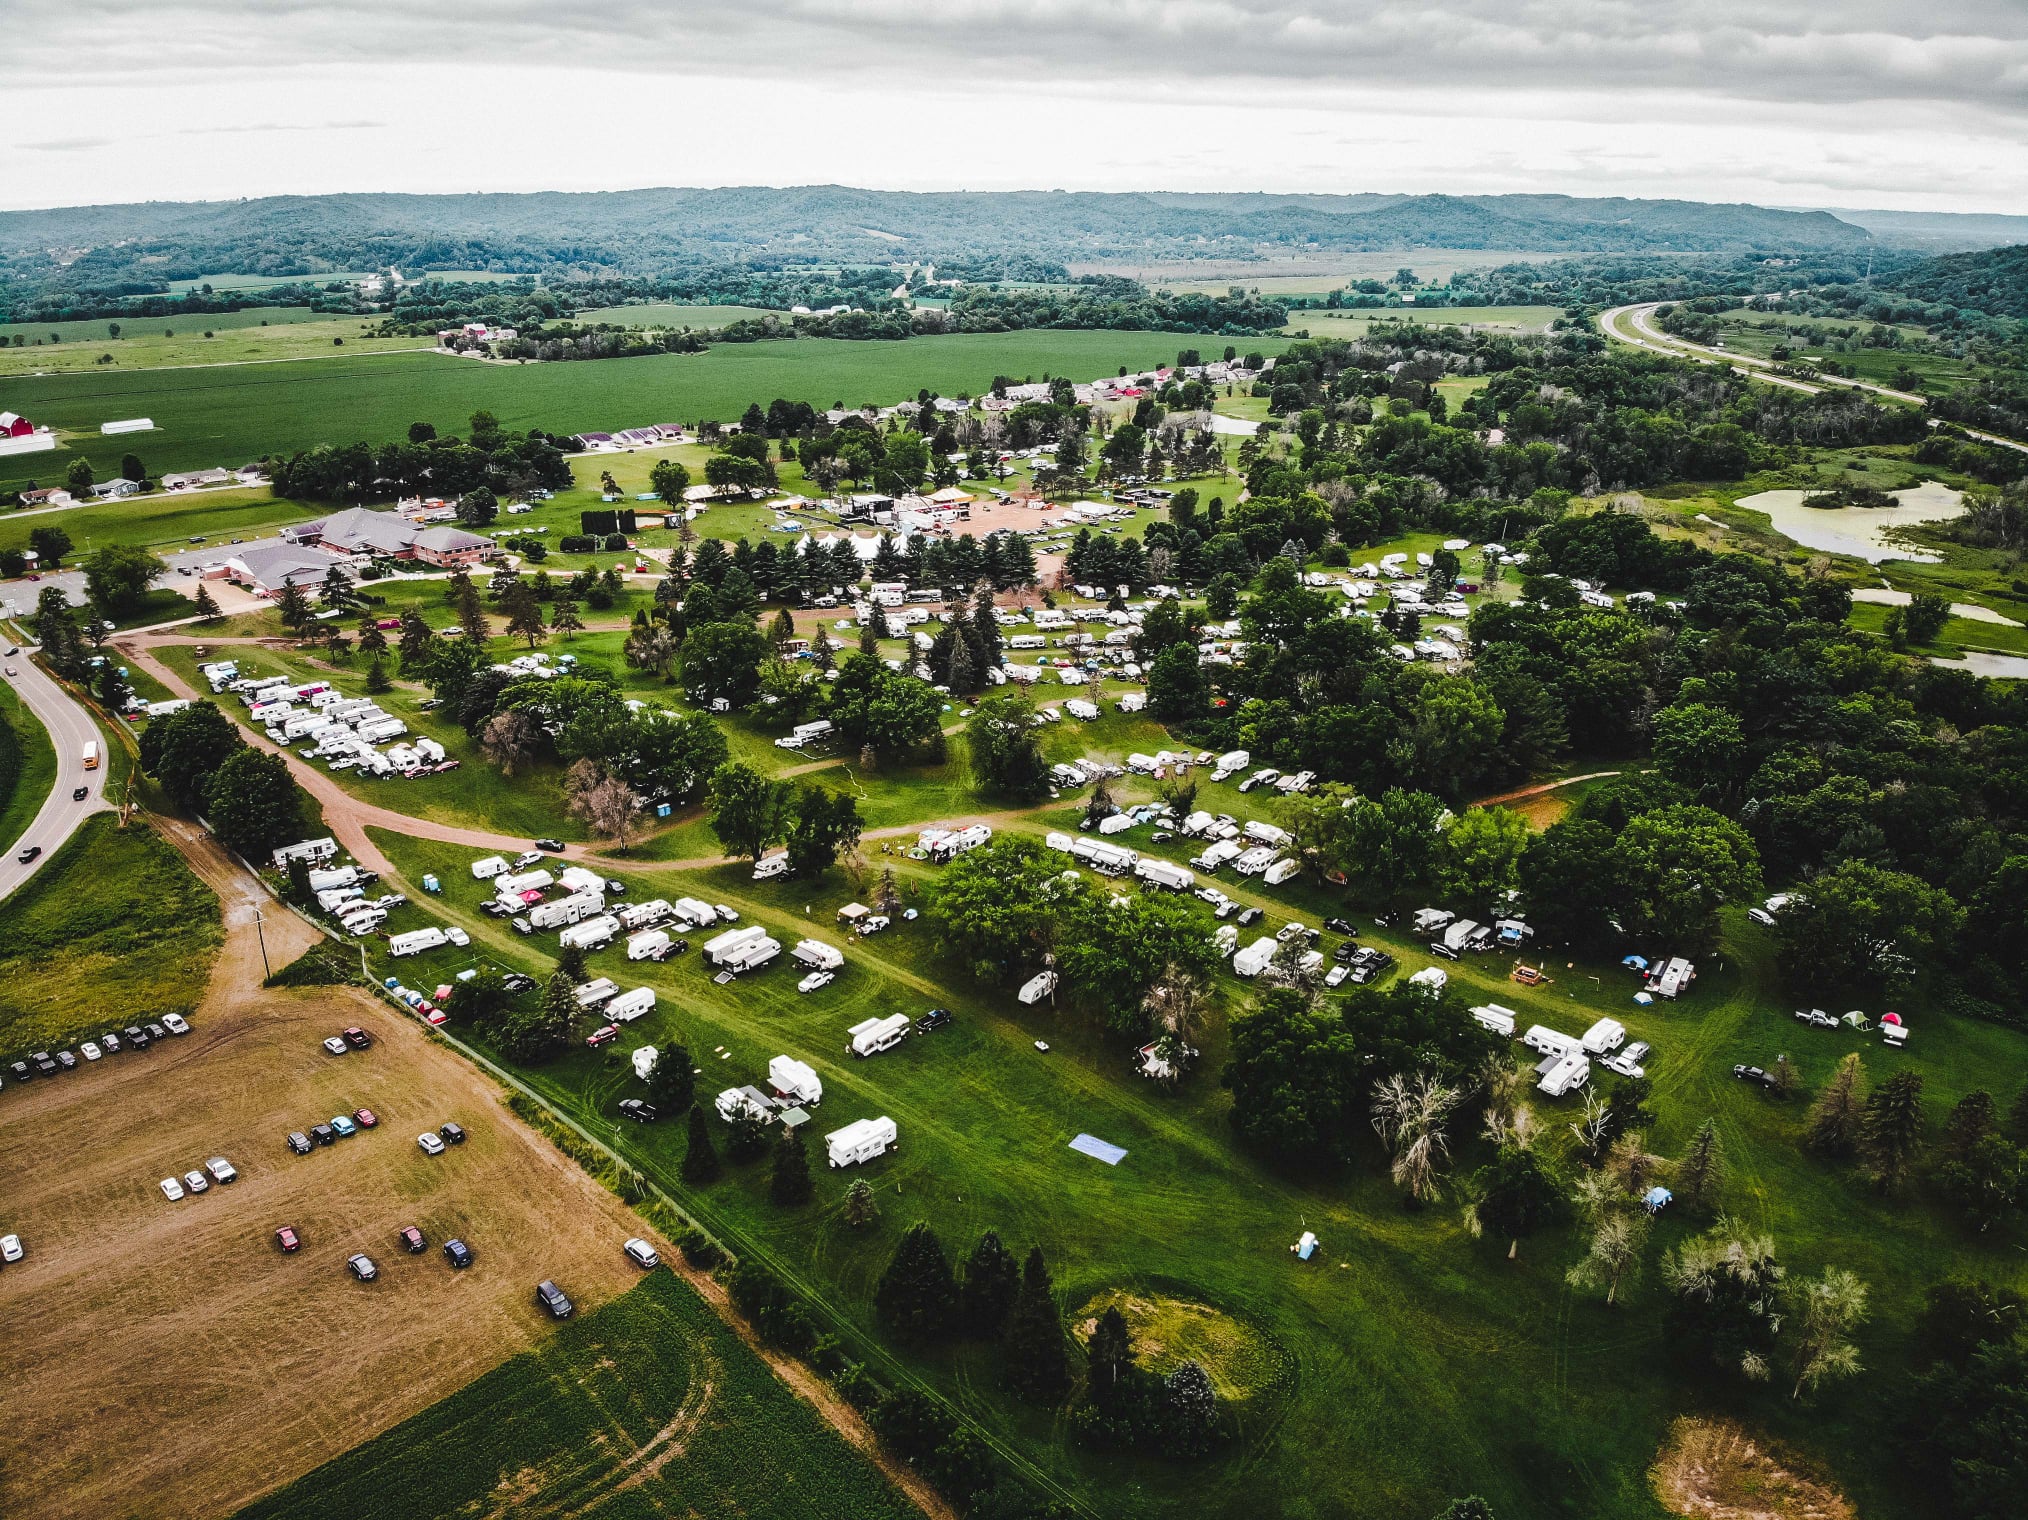 arial view of the campground at country boom in la crosse, wi